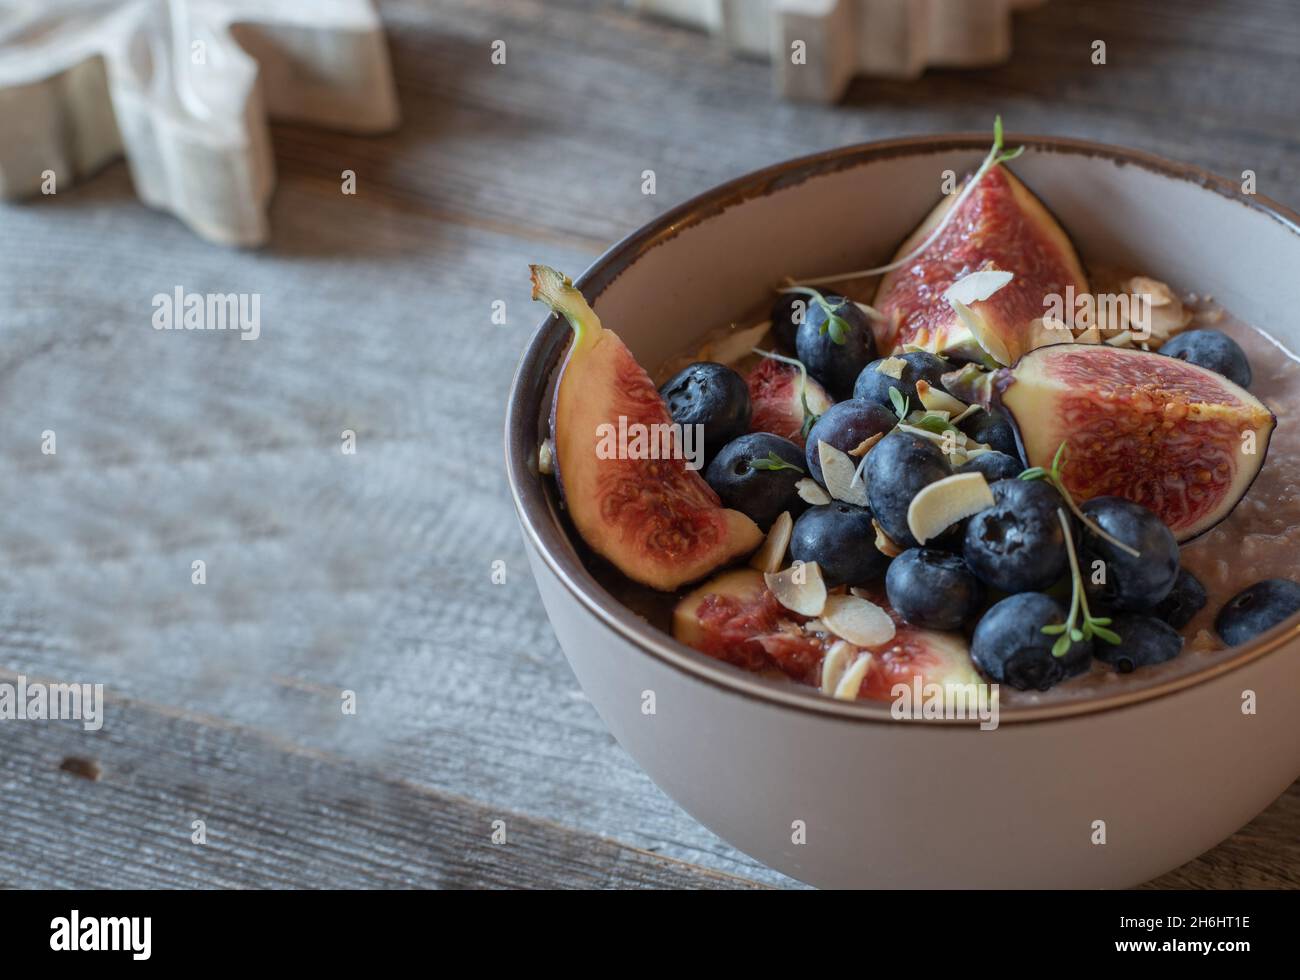 Fitness breakfast bowl with a porridge made with chocolate whey protein, roasted almonds, figs and fresh blueberries. Stock Photo